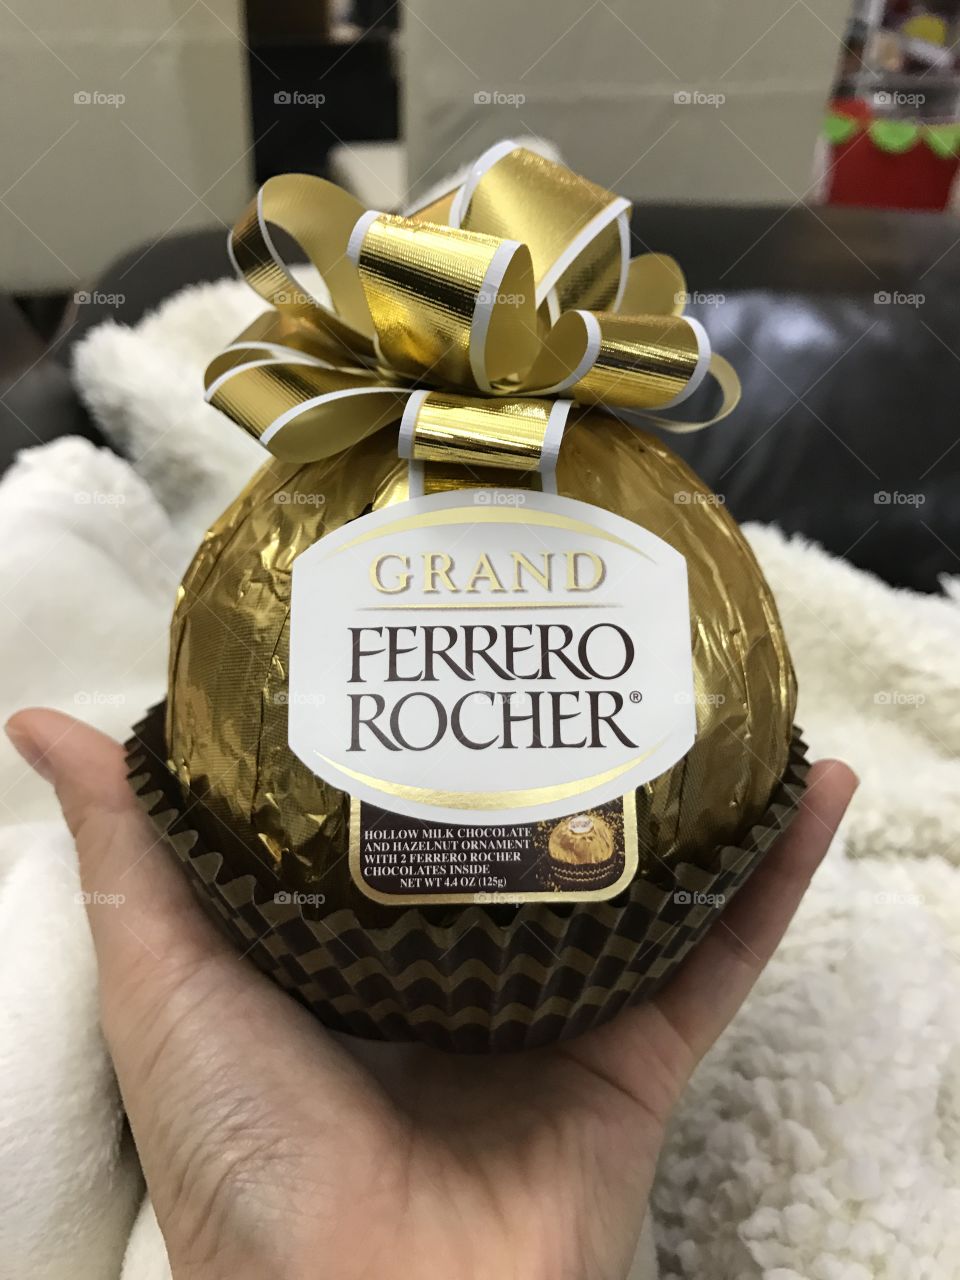 Ferrero rocher, giant size, bigger than my hands, bow